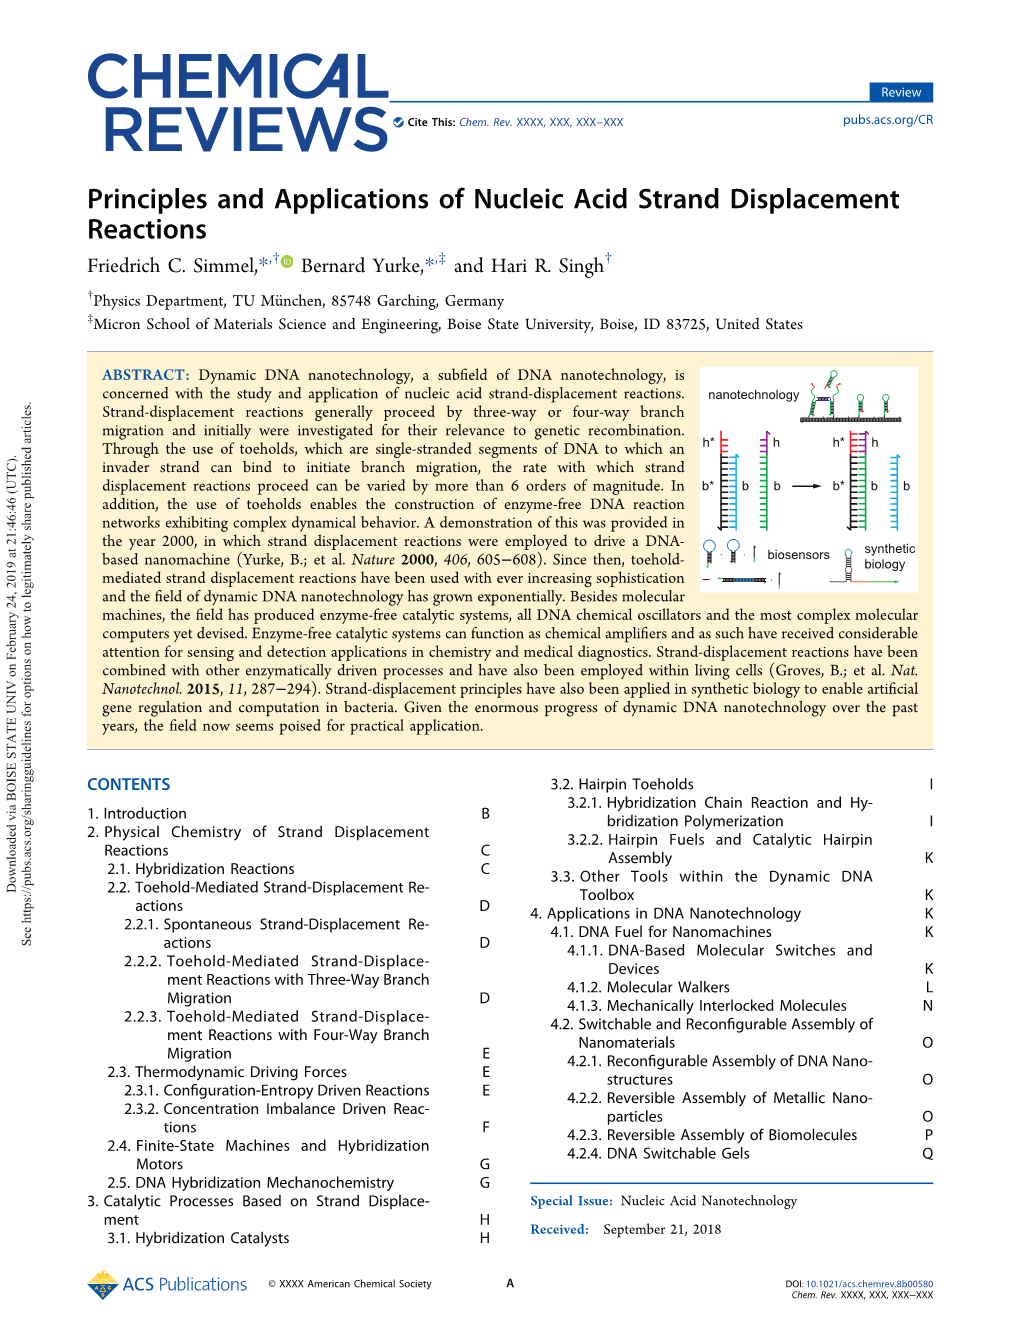 Principles and Applications of Nucleic Acid Strand Displacement Reactions † ‡ † Friedrich C